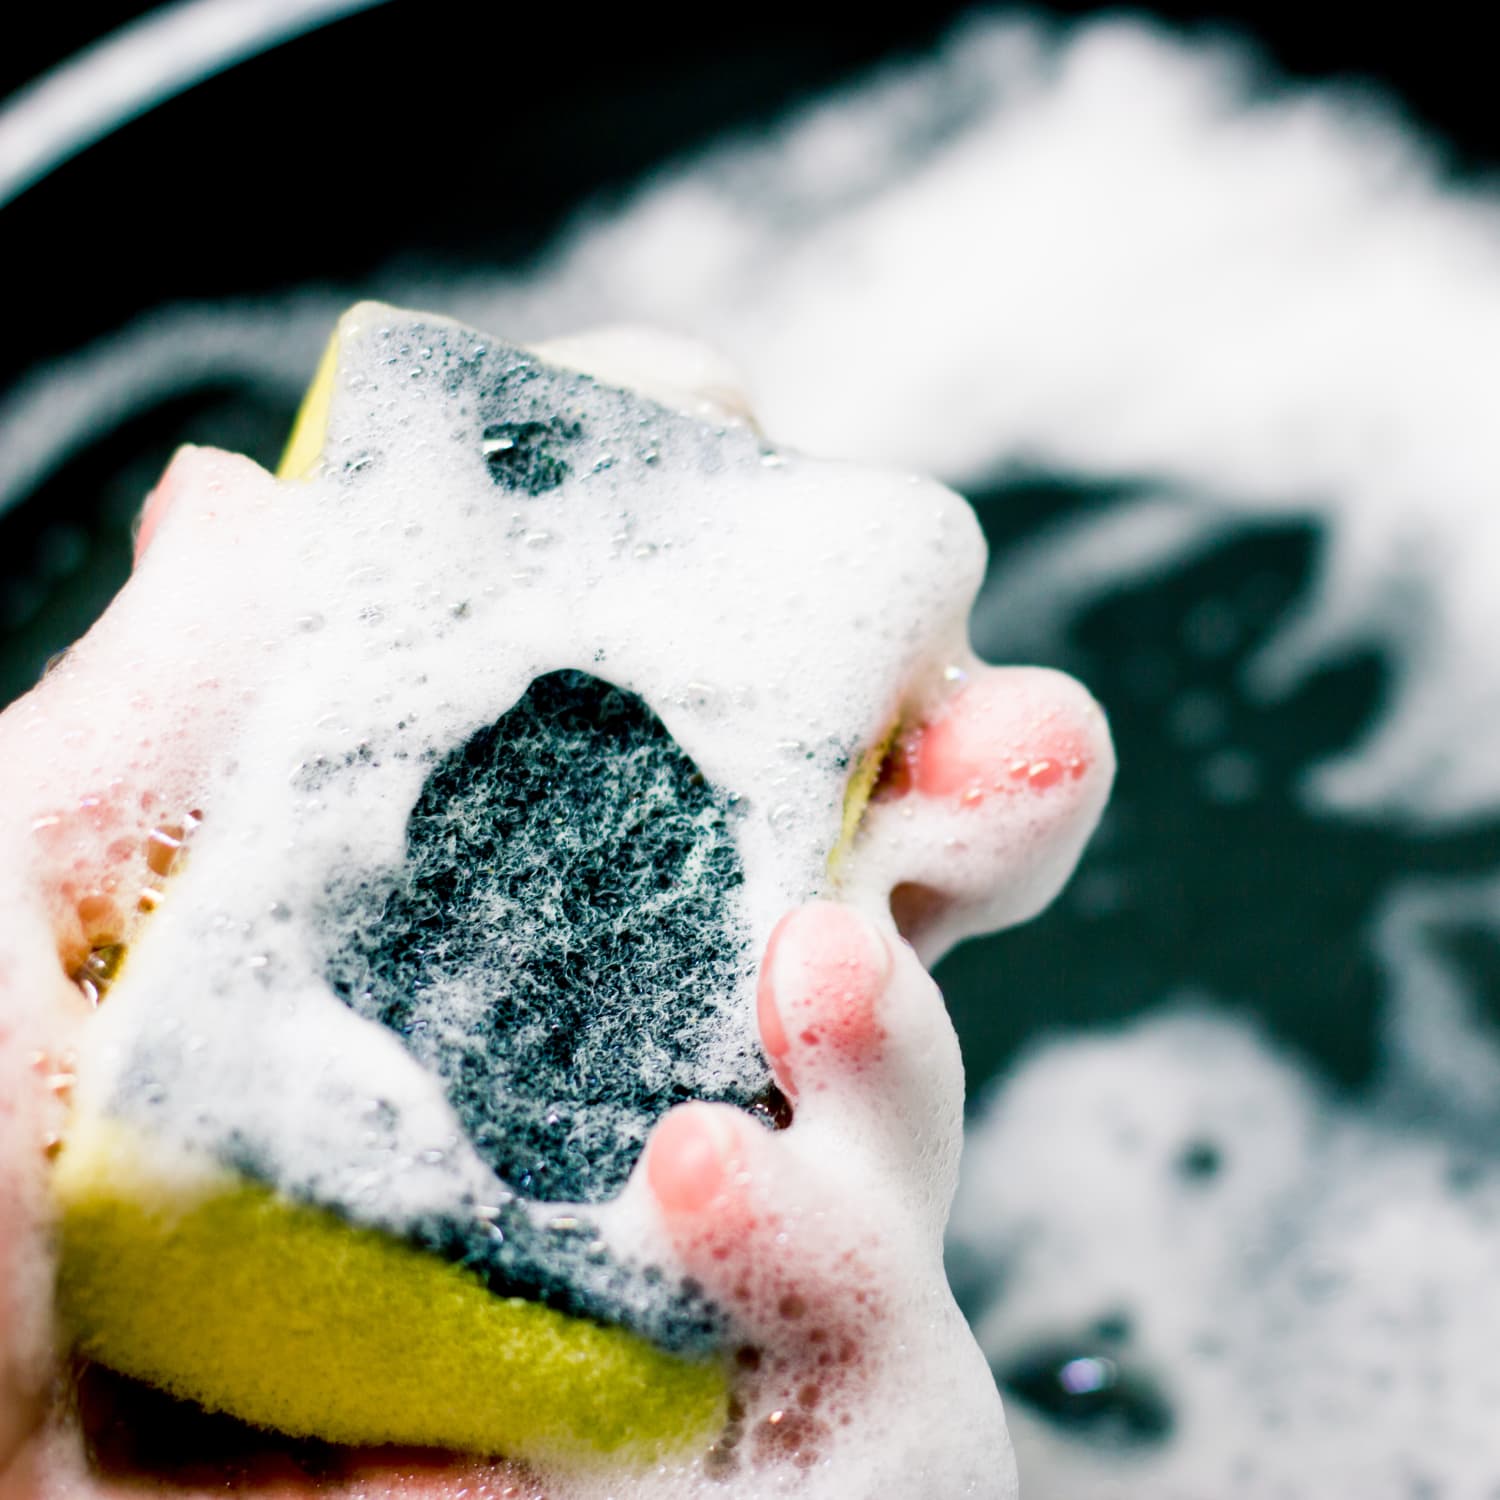 How to Clean a Sponge to Kill Germs - PureWow